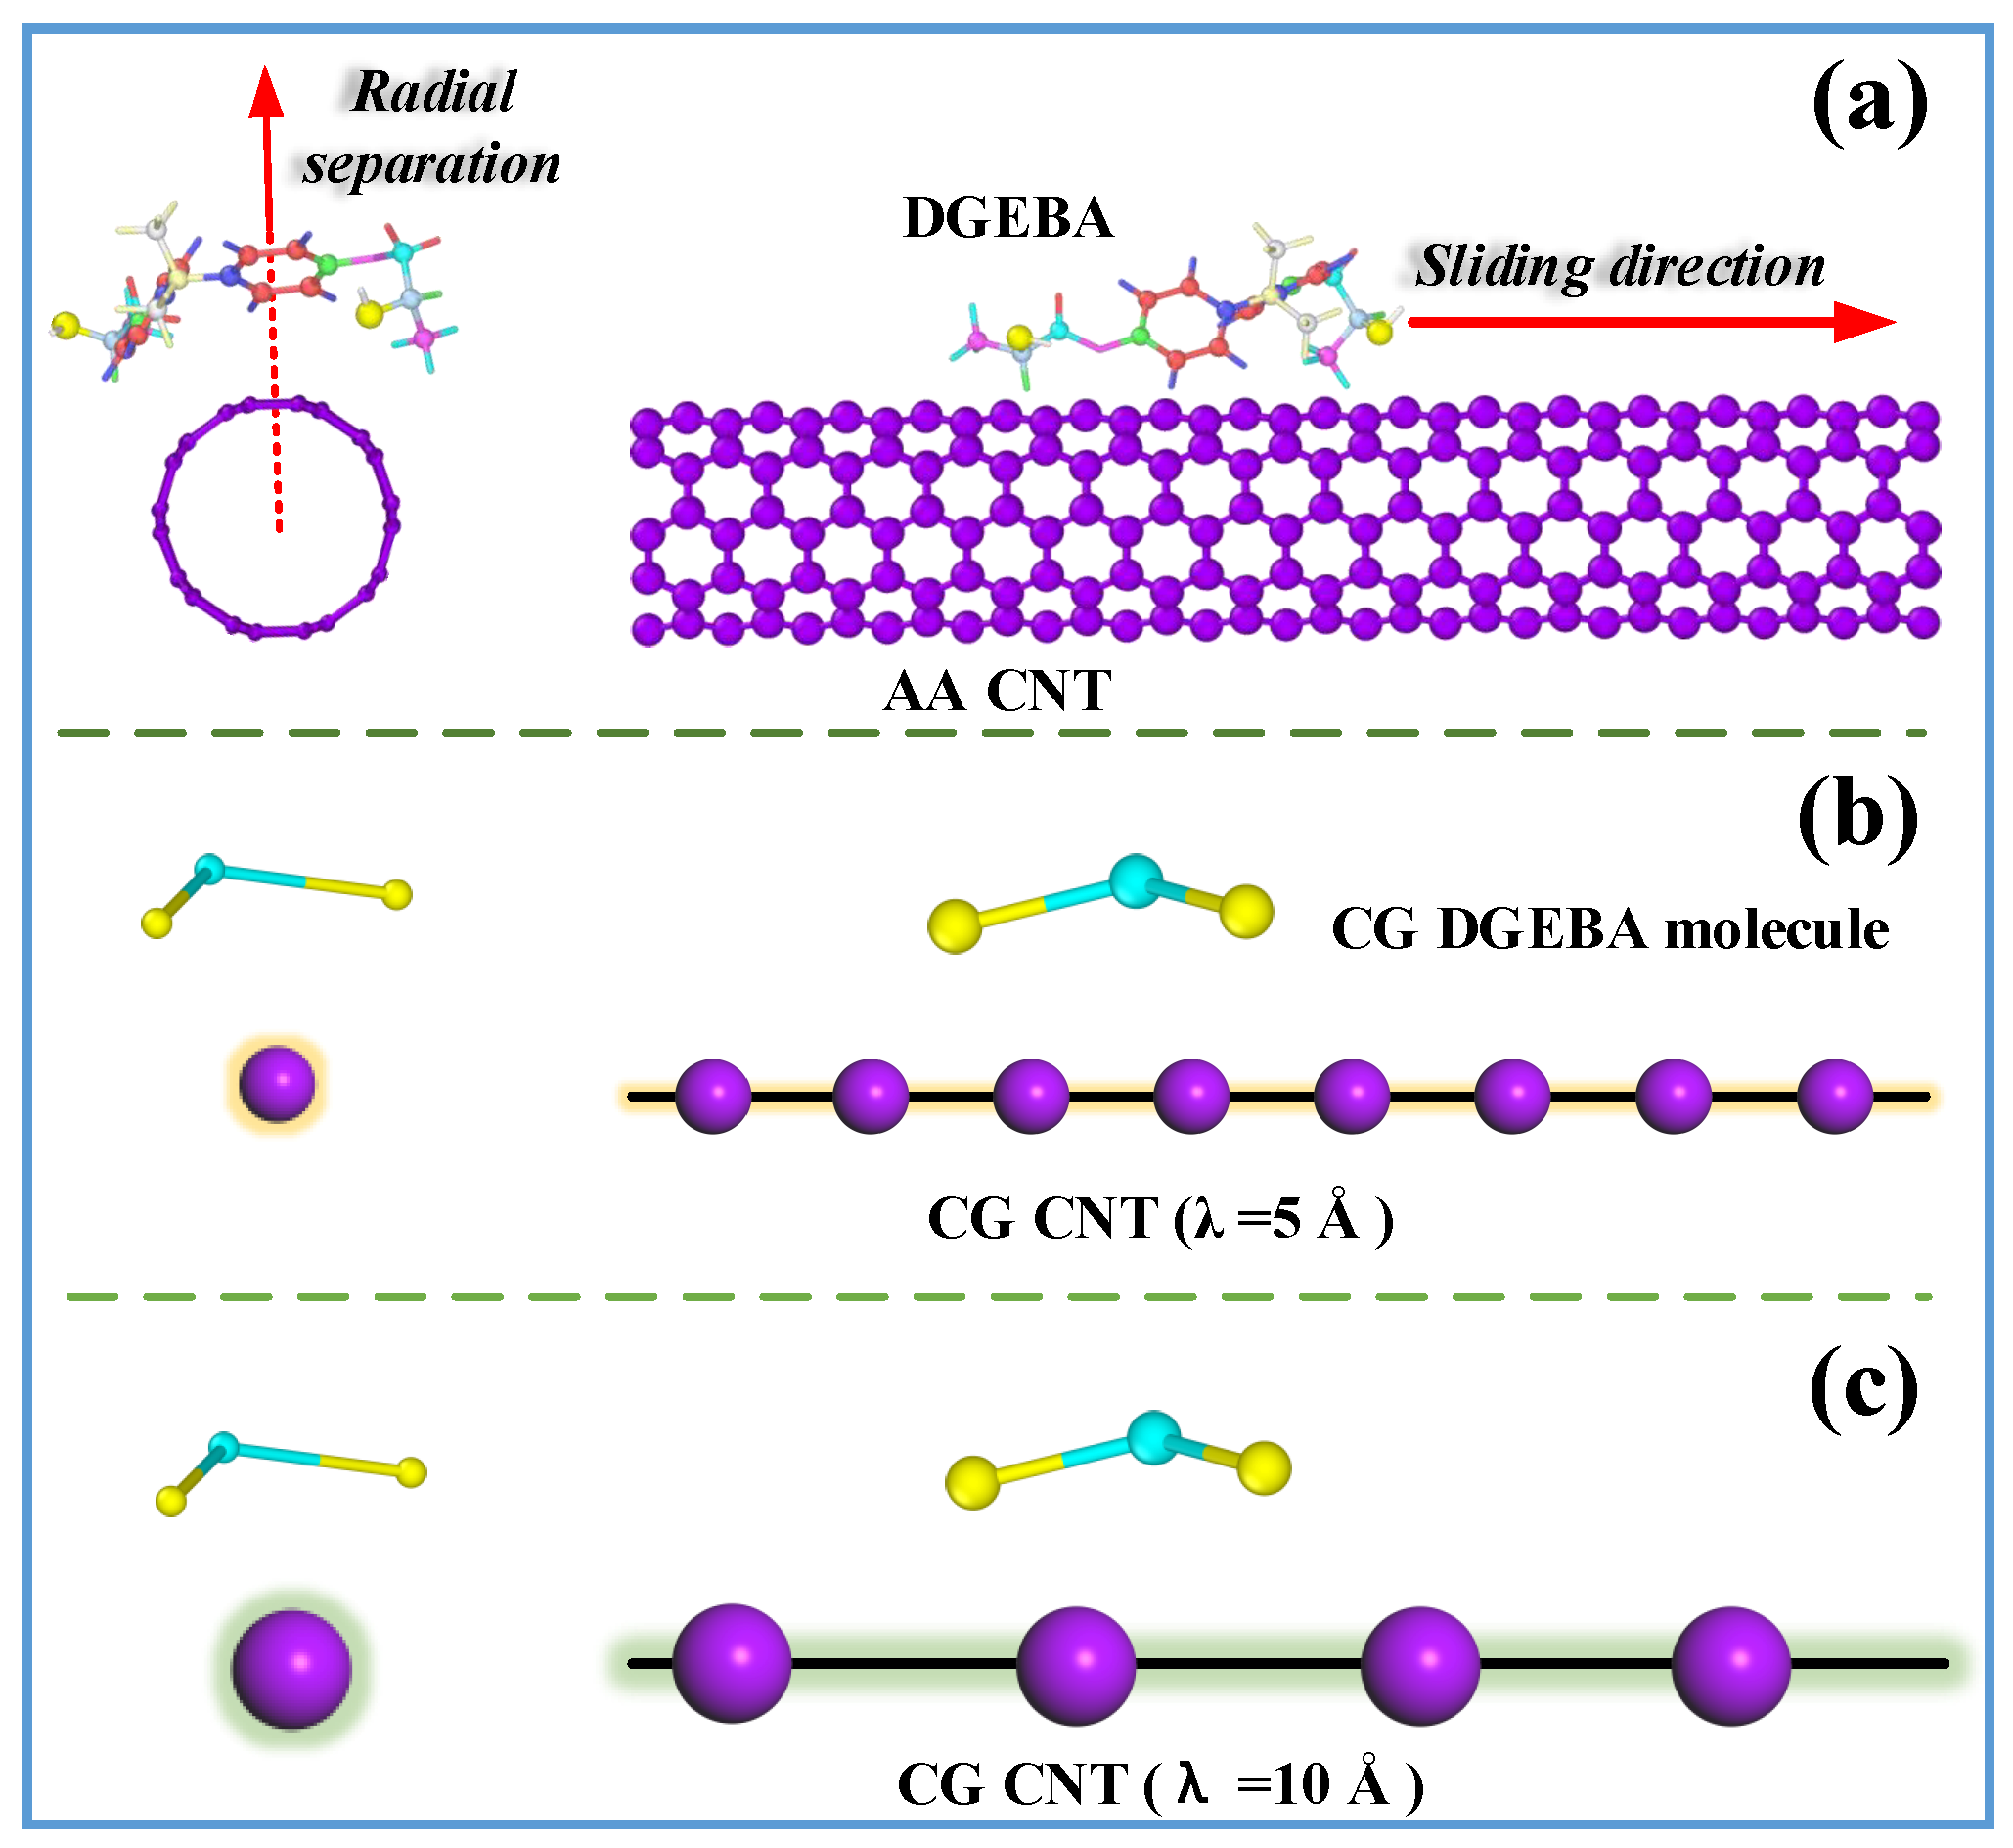 Nanomaterials Free Full Text Importance Of Interface In The Coarse Grained Model Of Cnt Epoxy Nanocomposites Html